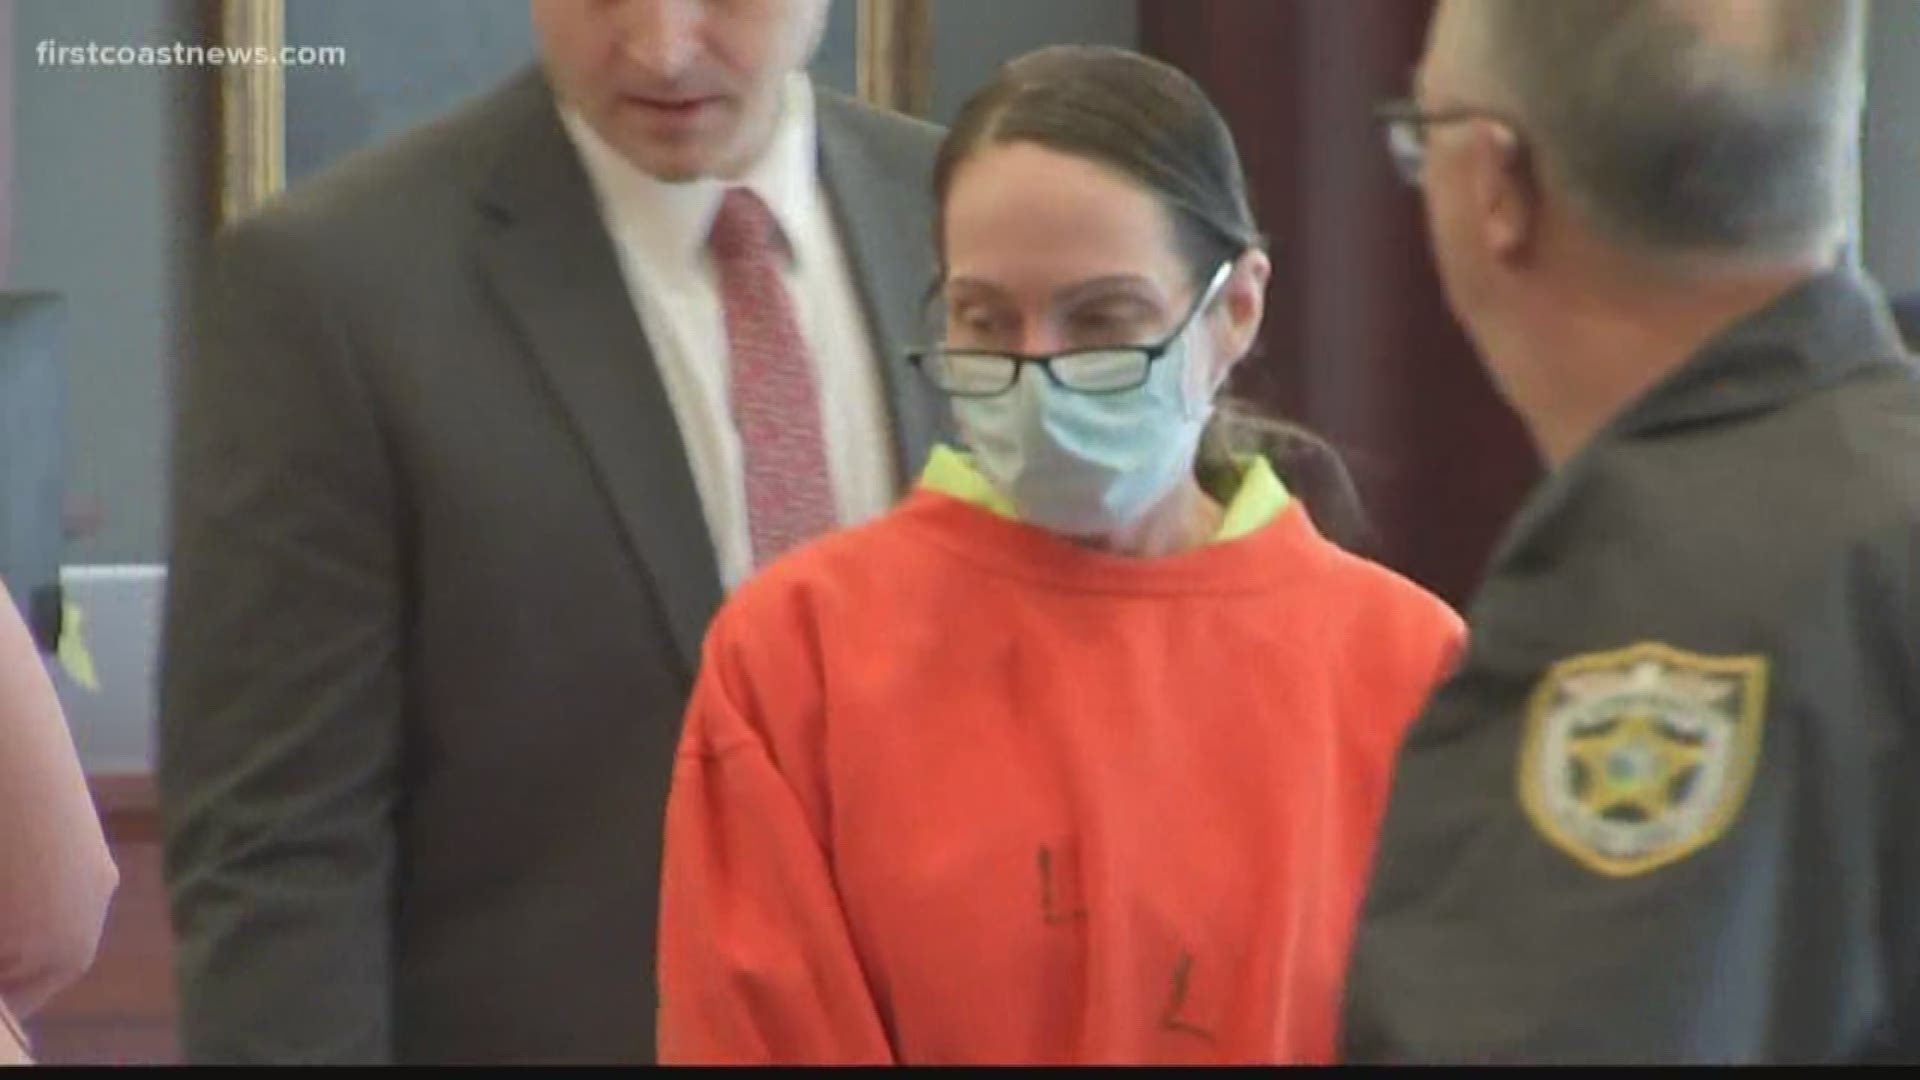 Kessler appeared in court Thursday with a new lawyer. She was also wearing a face mask because of her refusal to submit to health tests. Next hearing set for Feb 25.